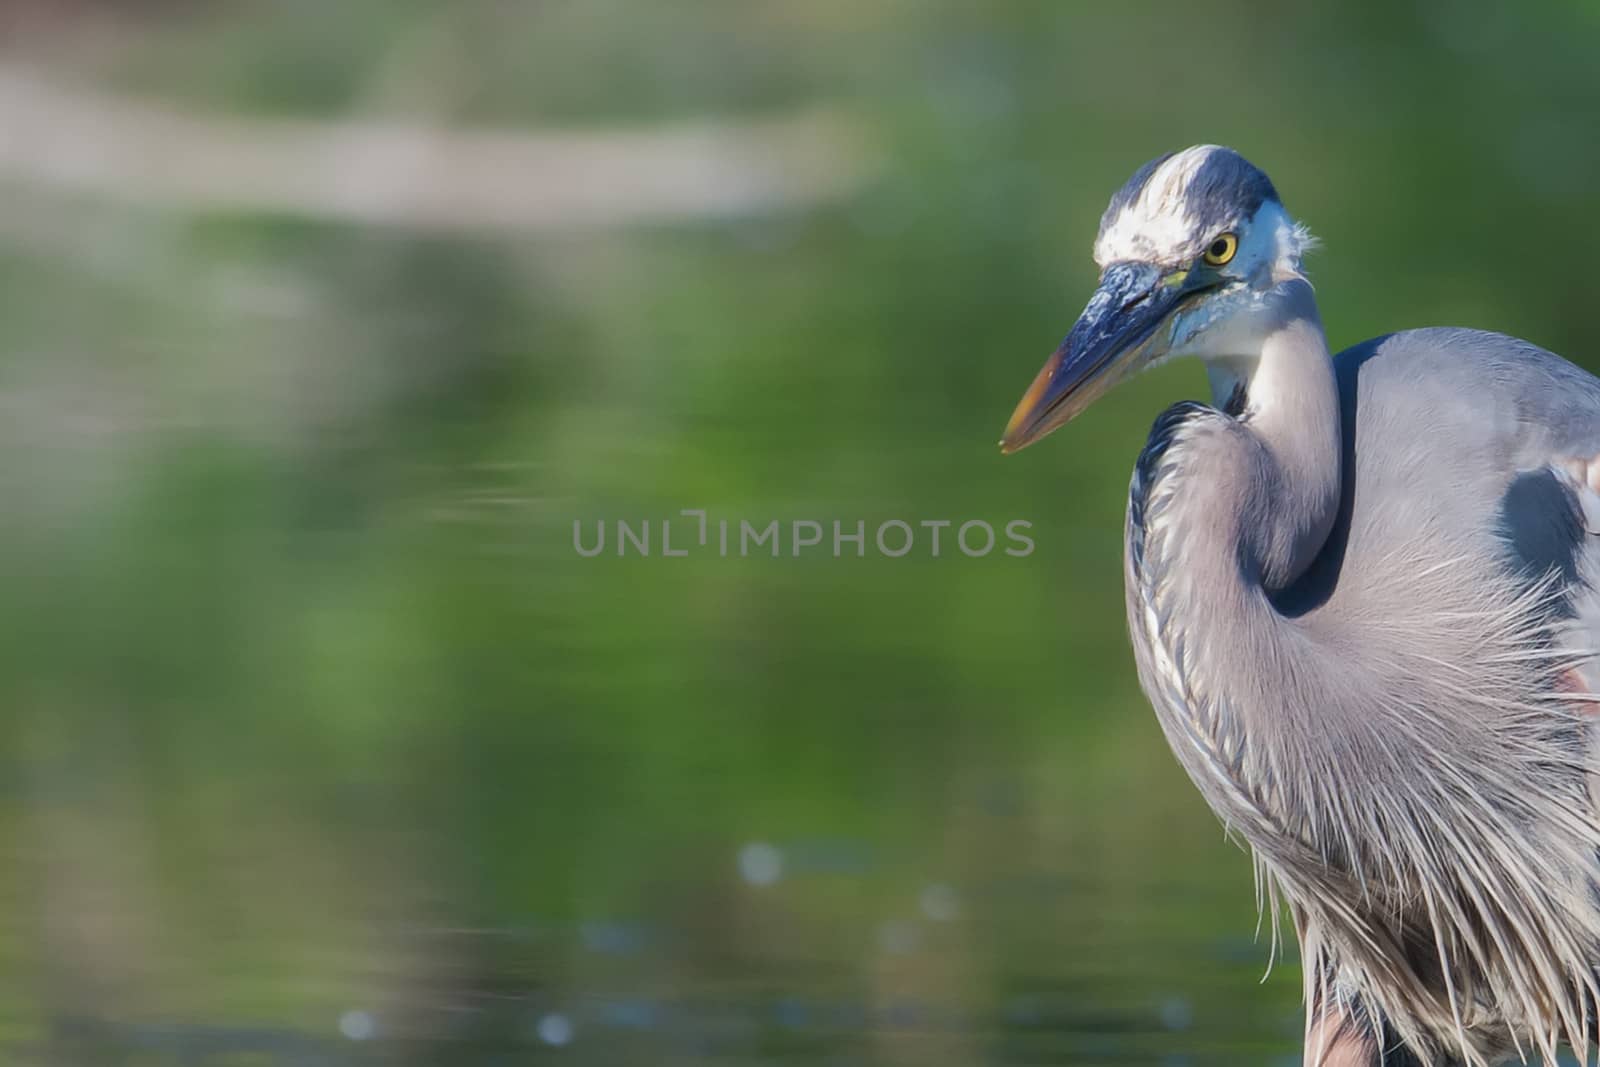 Great Blue Heron Fishing in soft focus by Coffee999